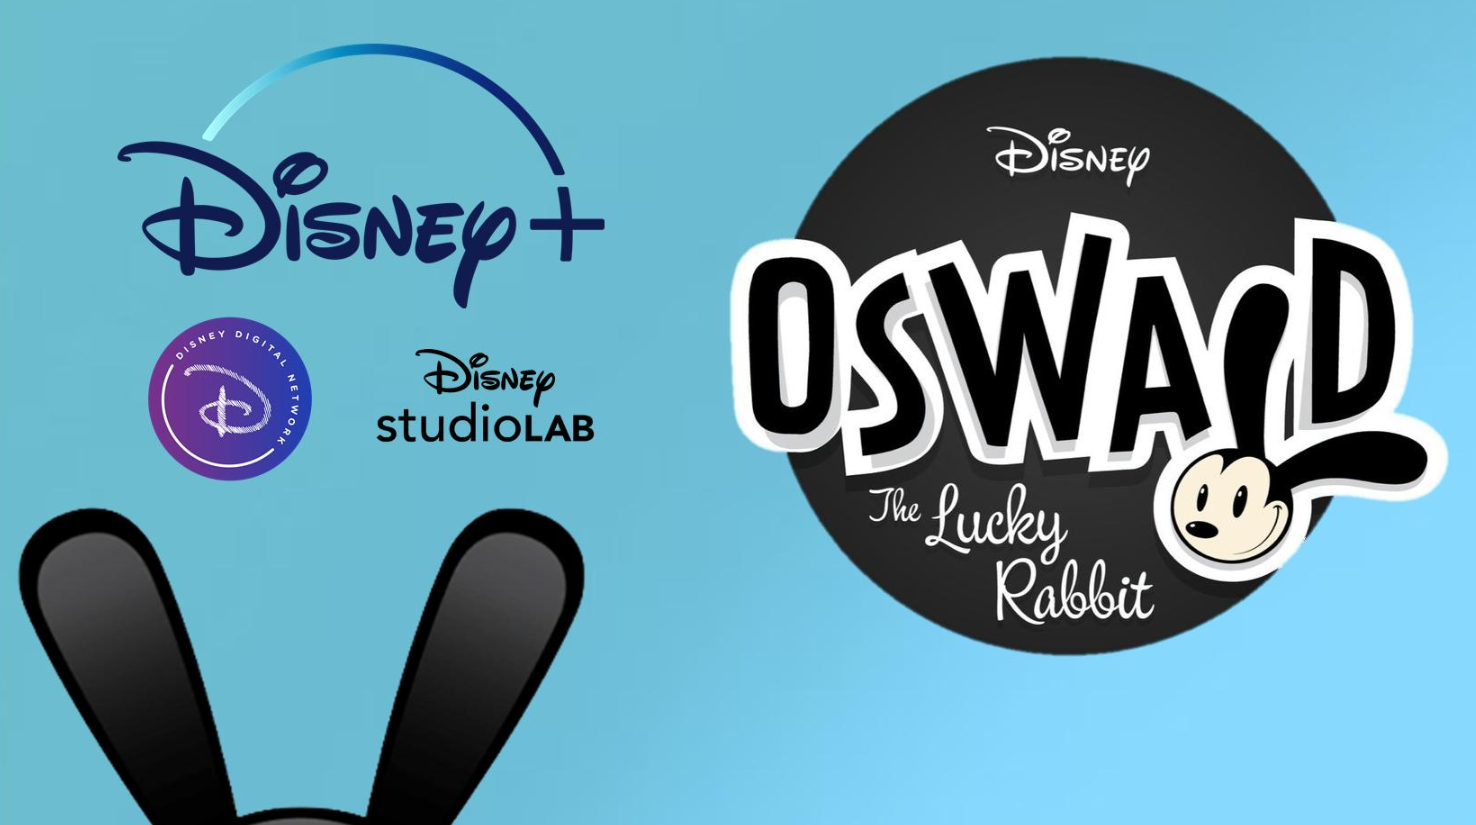 Oswald the Lucky Rabbit TV show coming to Disney+ Streaming Service